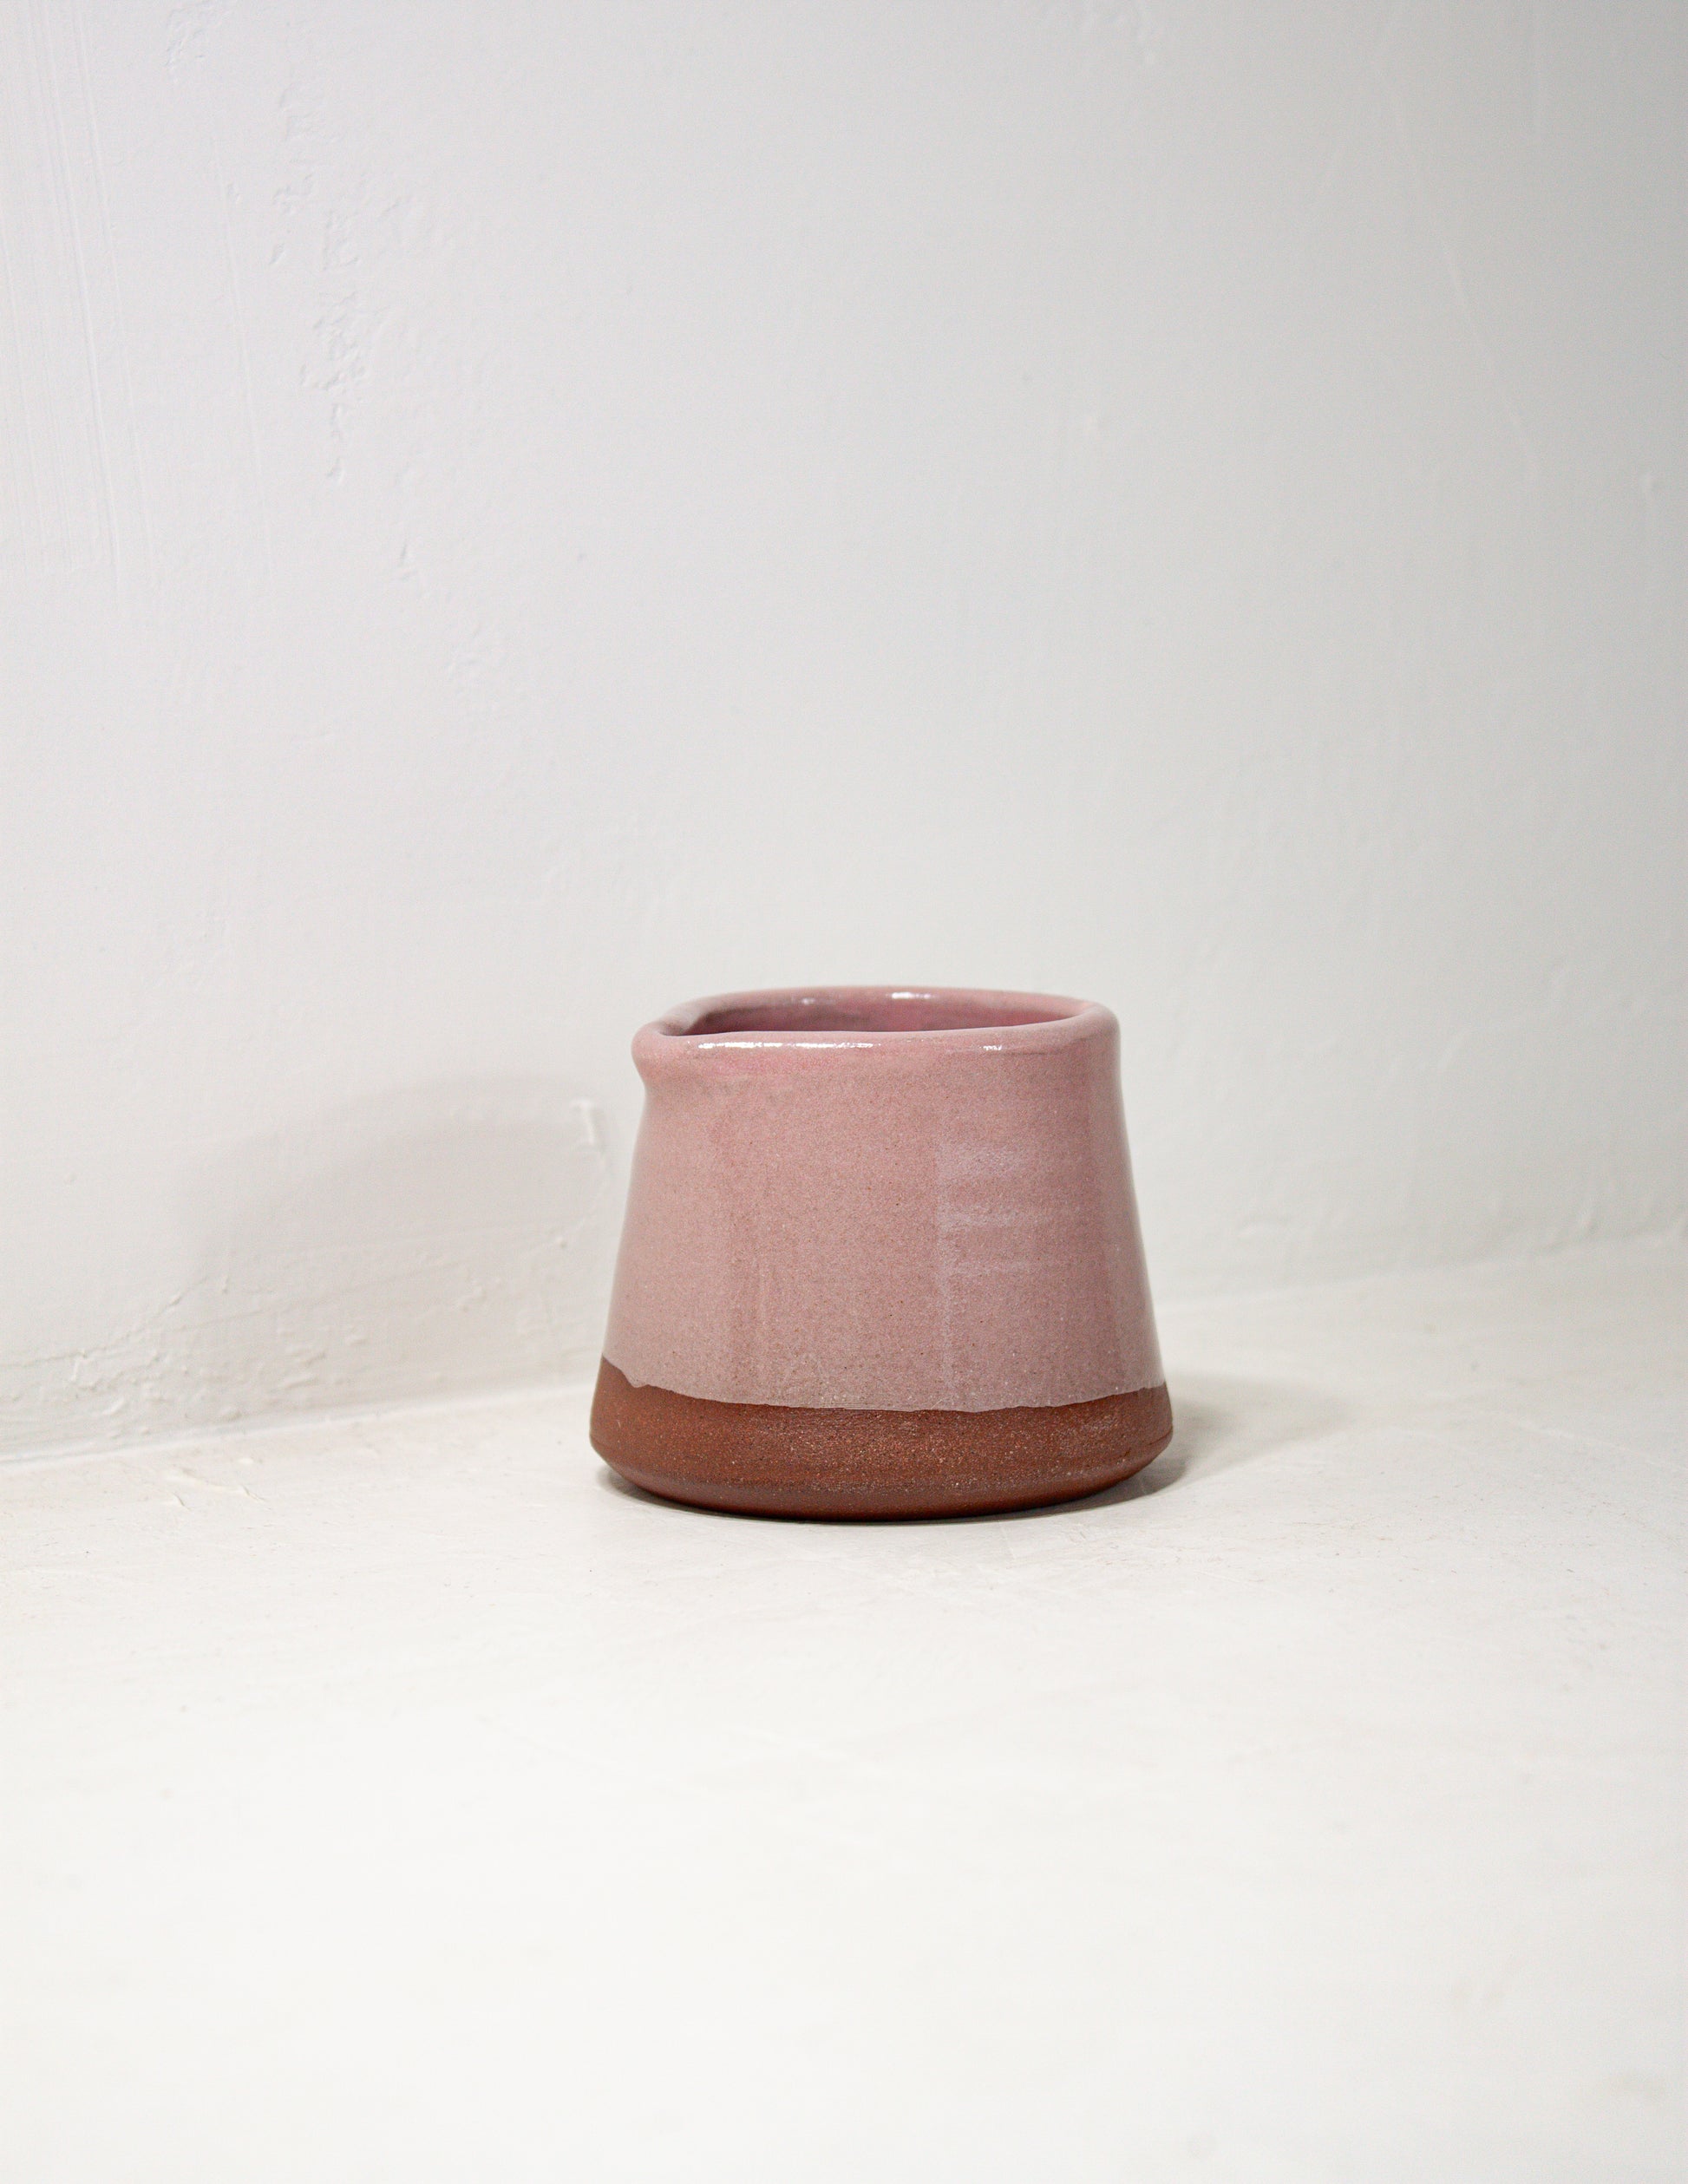 small pink pitcher designed for creamer